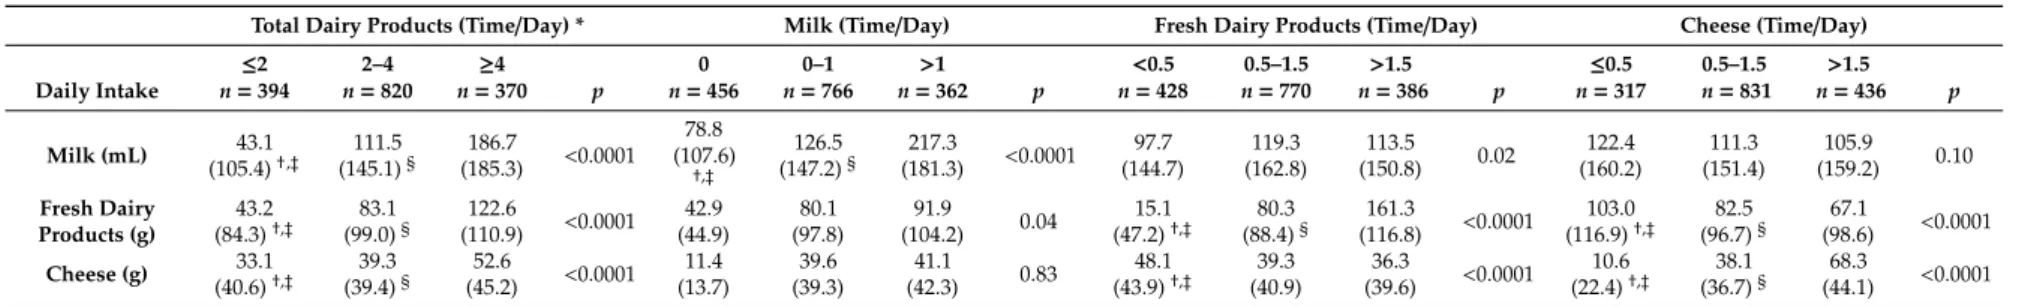 Table 4. Mean daily dairy product (and subtypes) intakes based on the weekly frequency consumption of total dairy products and dairy product subtypes among elderly community dwellers from the 3C study, Bordeaux (France), 2001–2002, n = 1584.